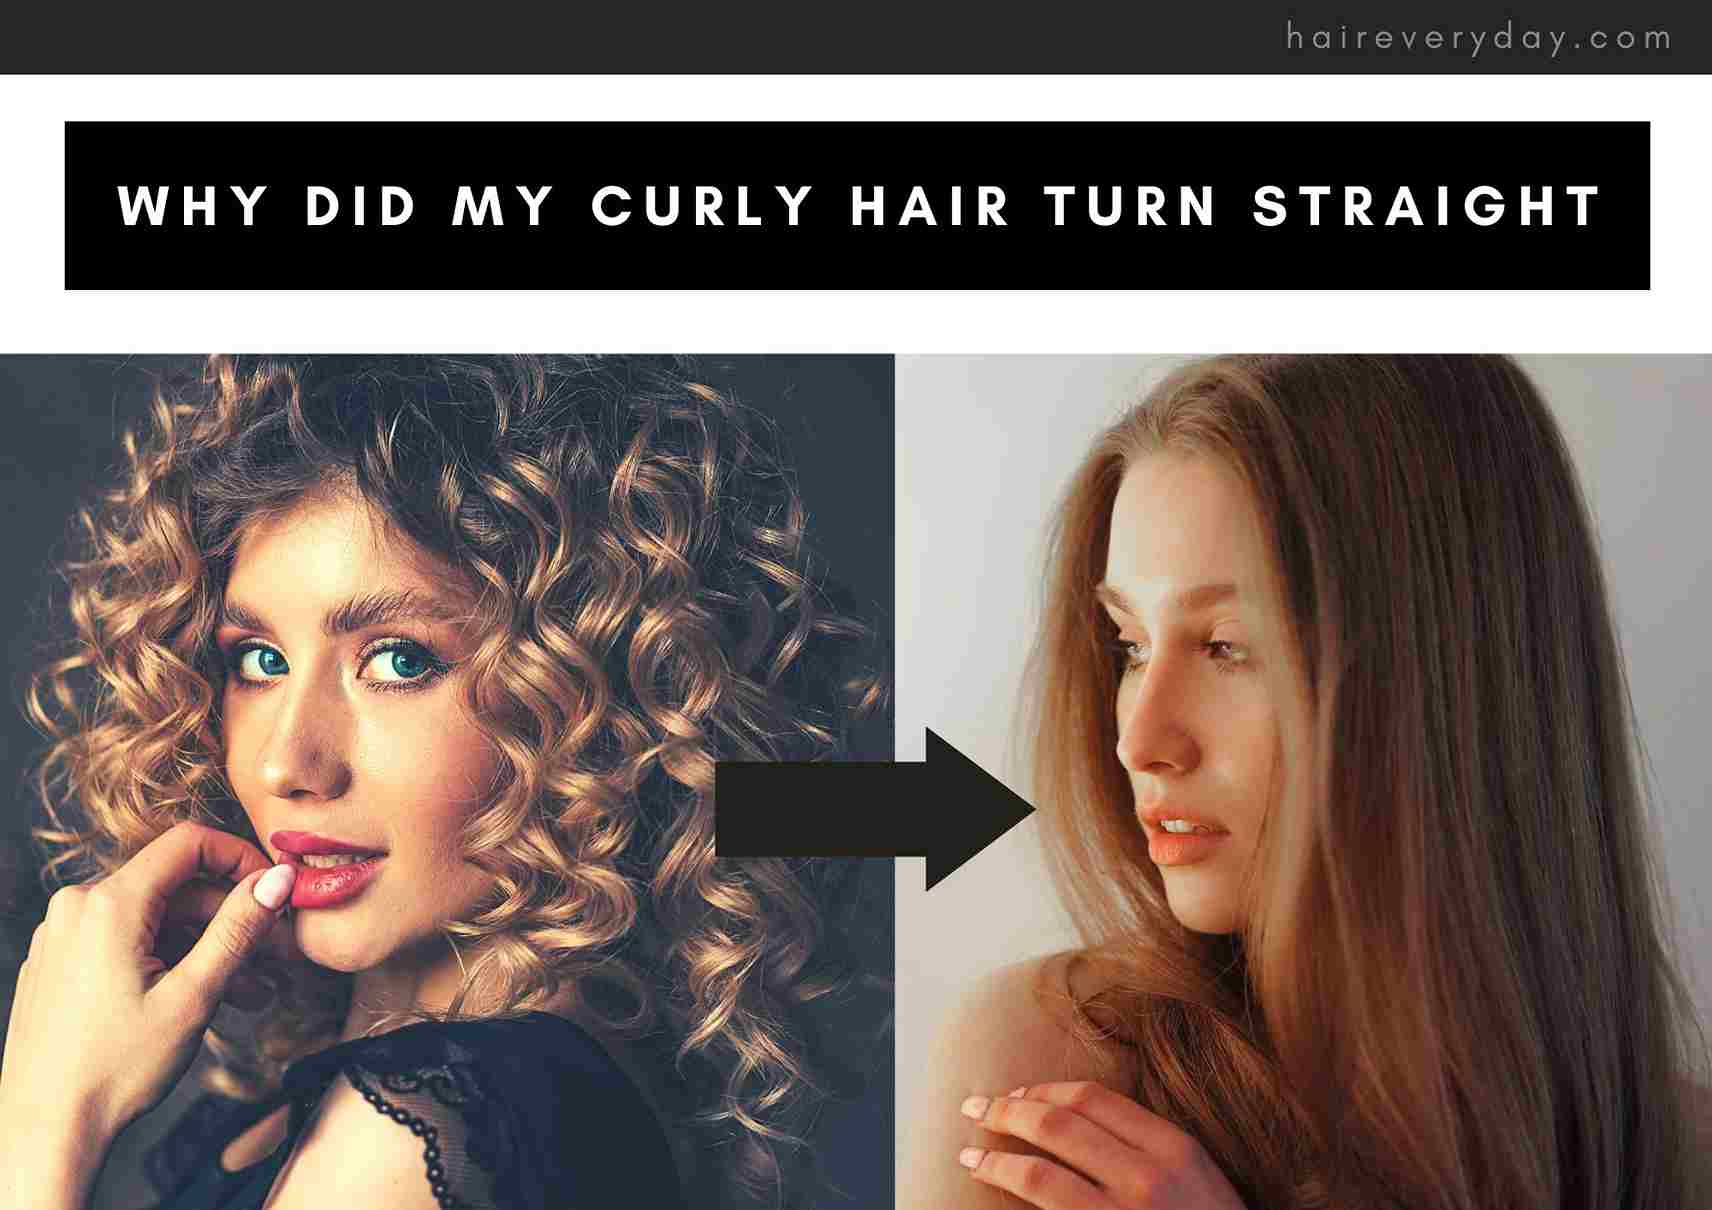 Half Curly Half Straight Hair: Everything You Need To Know - ShutterBulky